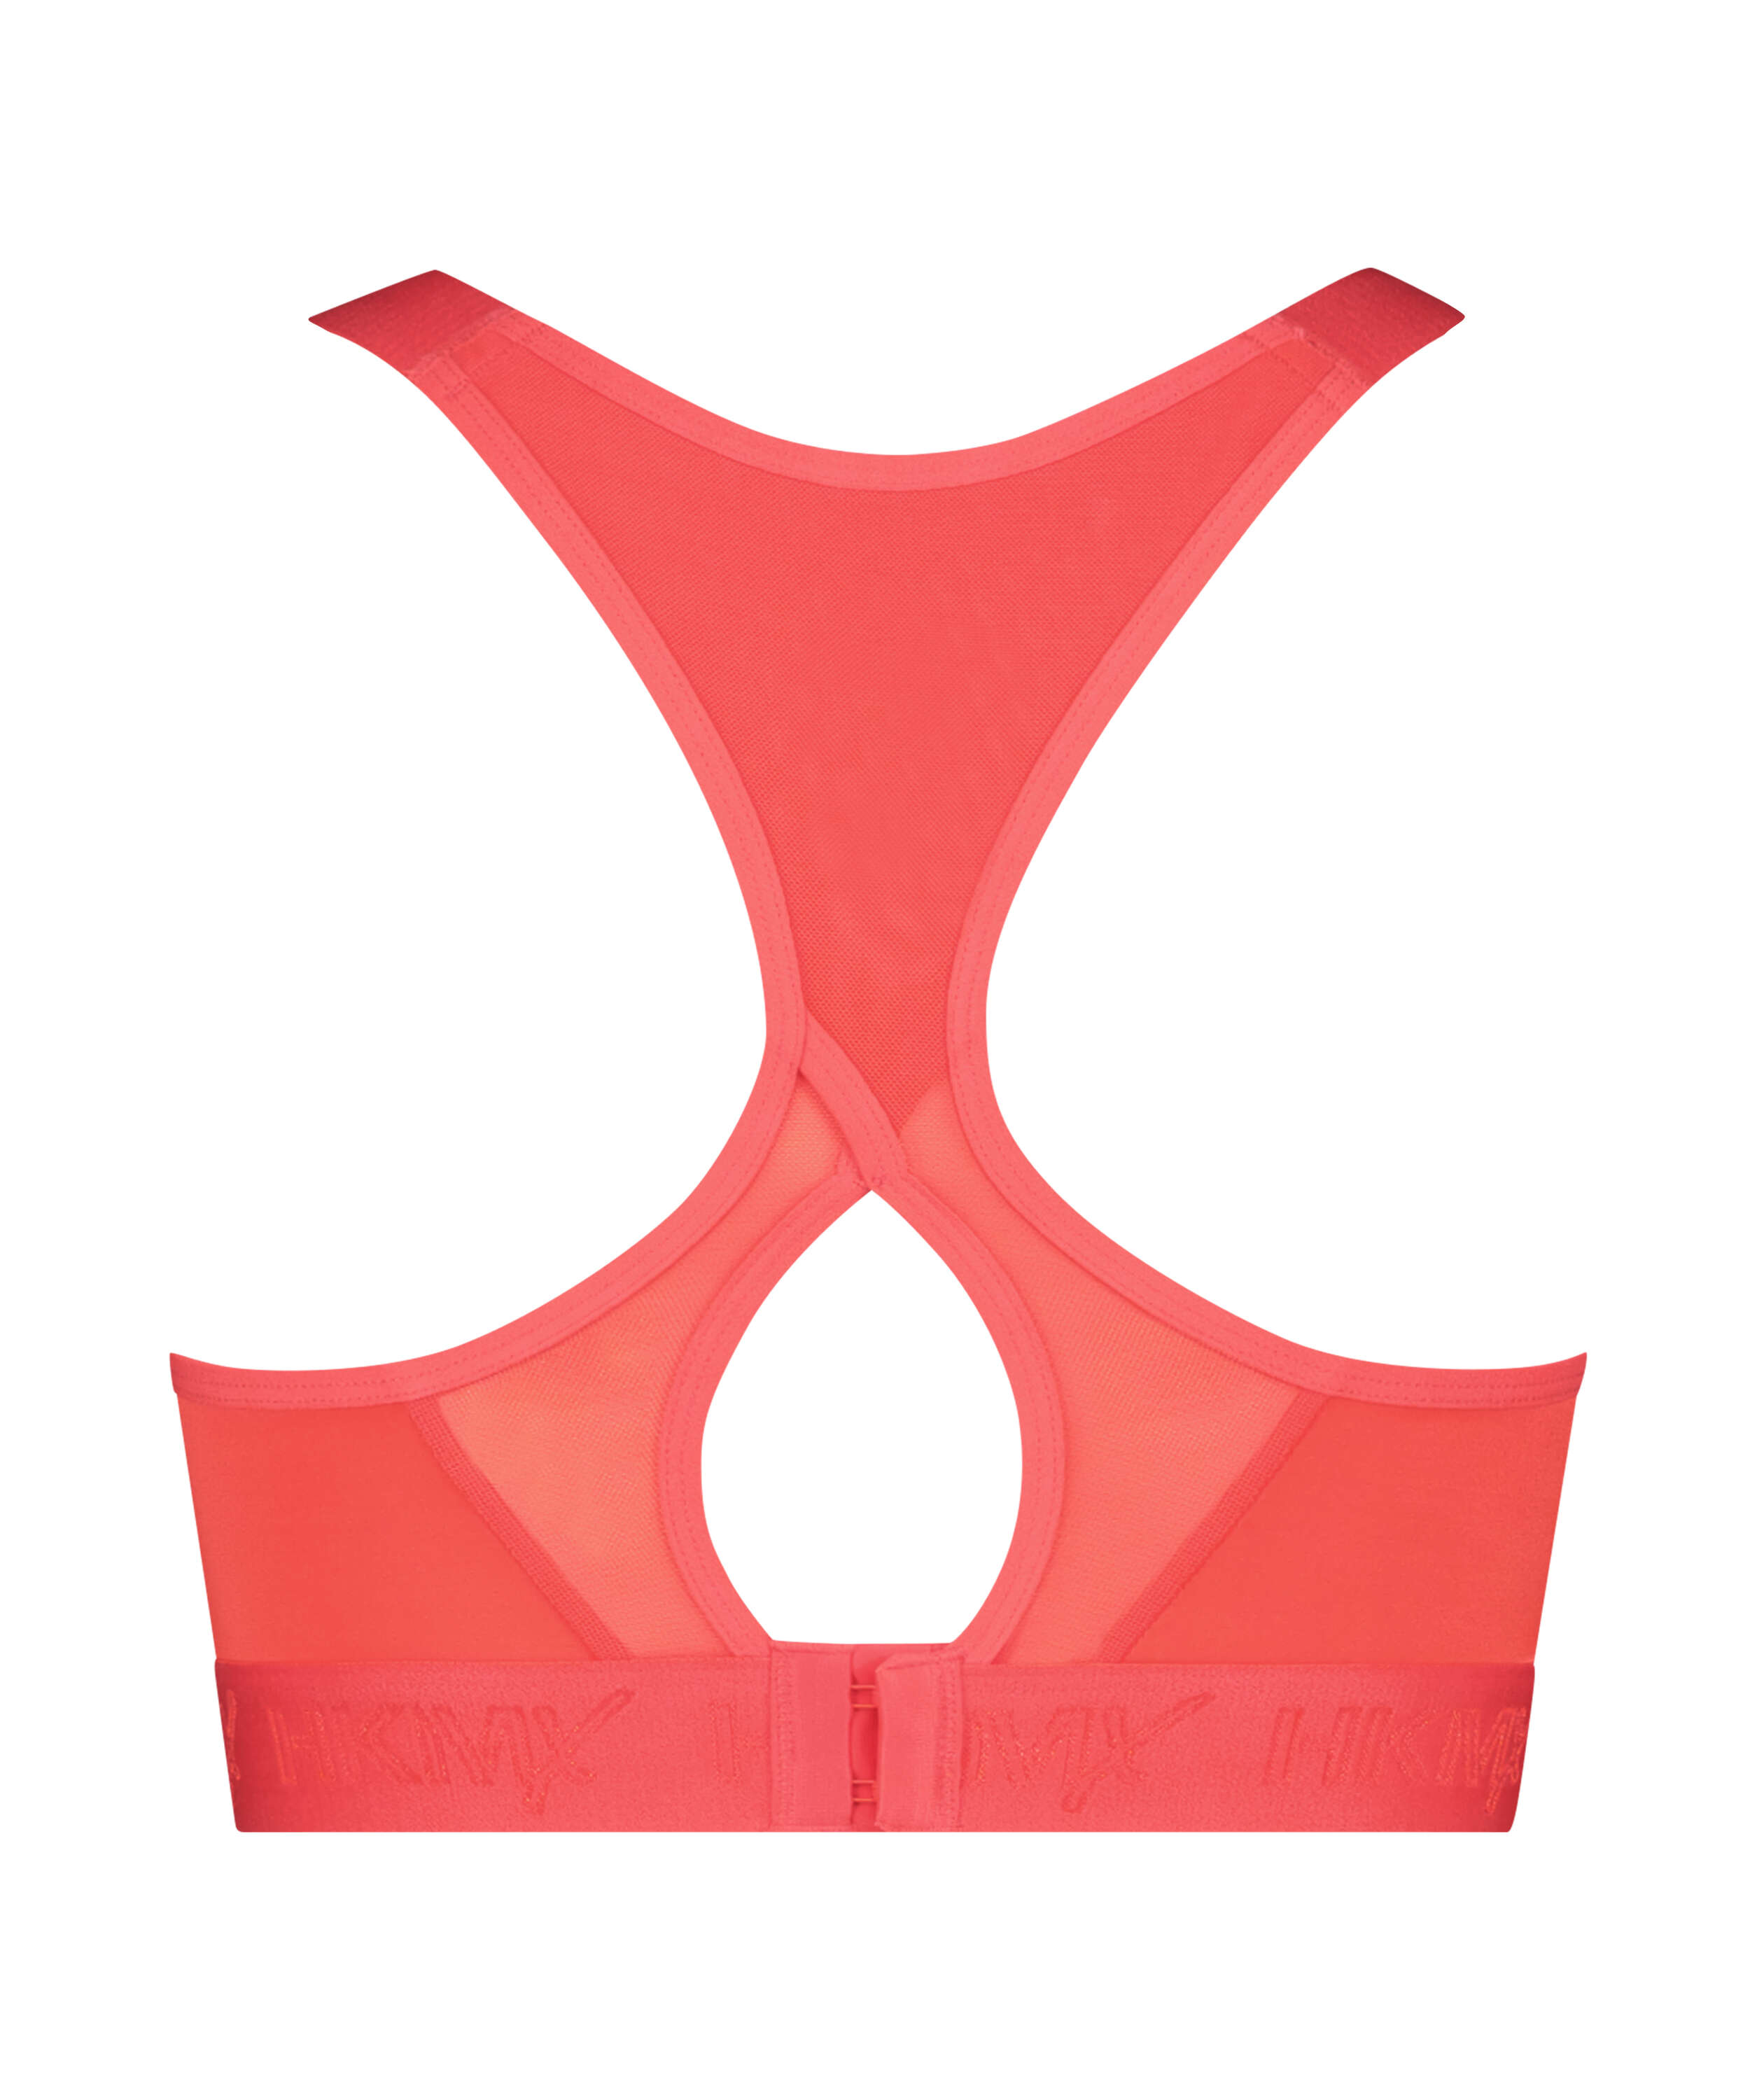 HKMX Sports Bra The All Star Level 2 , Red, main